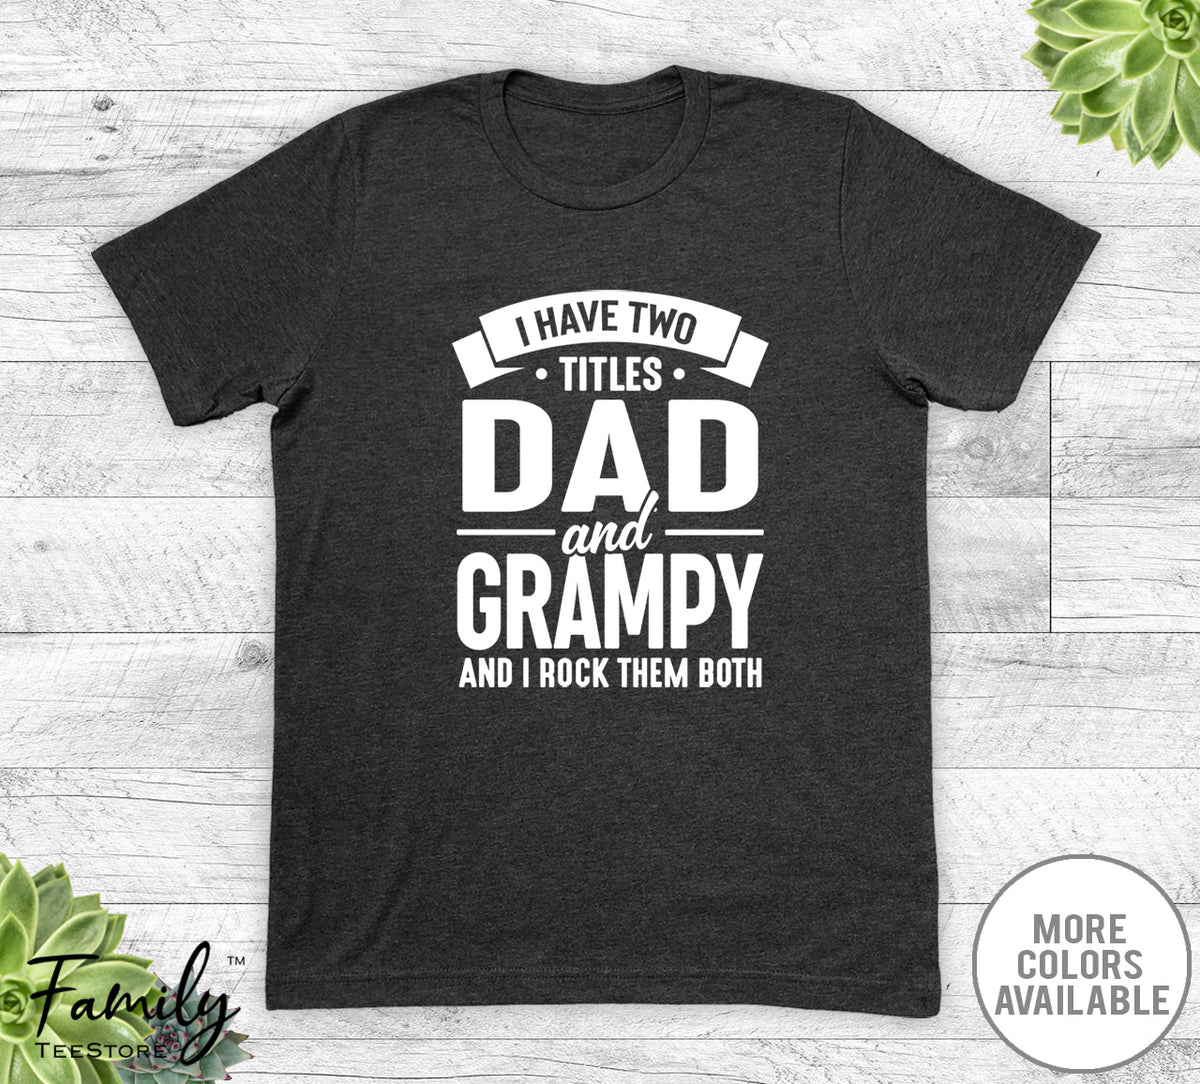 I Have Two Titles Dad And Grampy - Unisex T-shirt - Grampy Shirt - Funny Grampy Gift